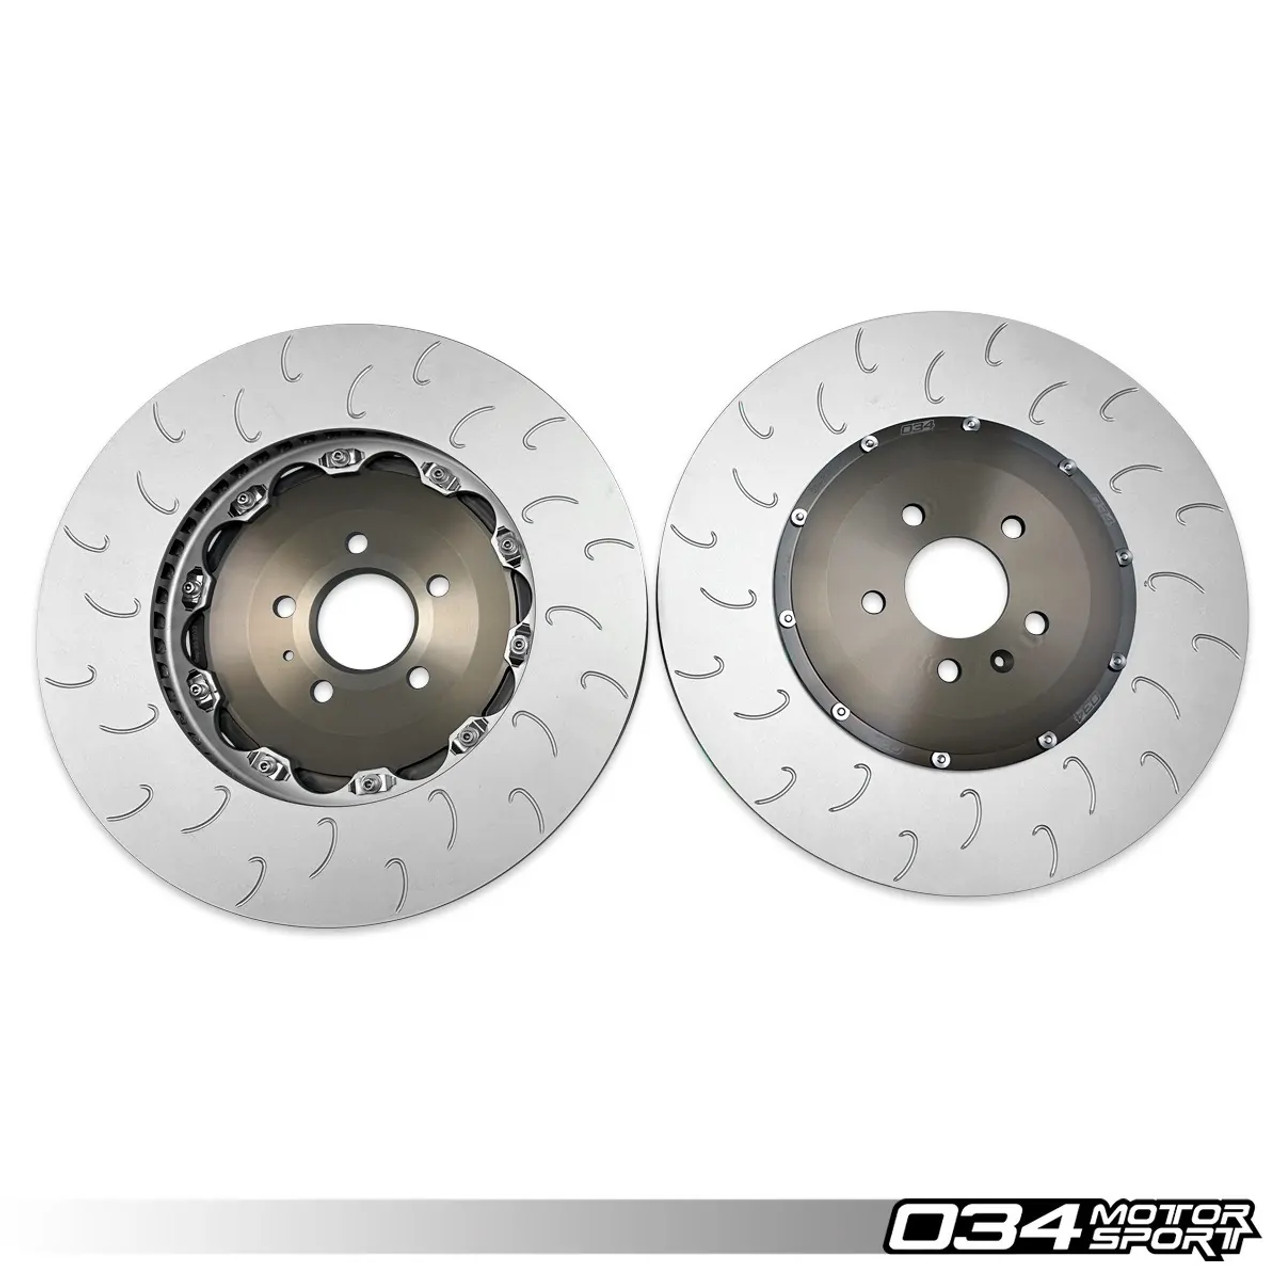 034Motorsport 2-Piece Floating Front Rotor Upgrade Kit for C7 S6 & S7